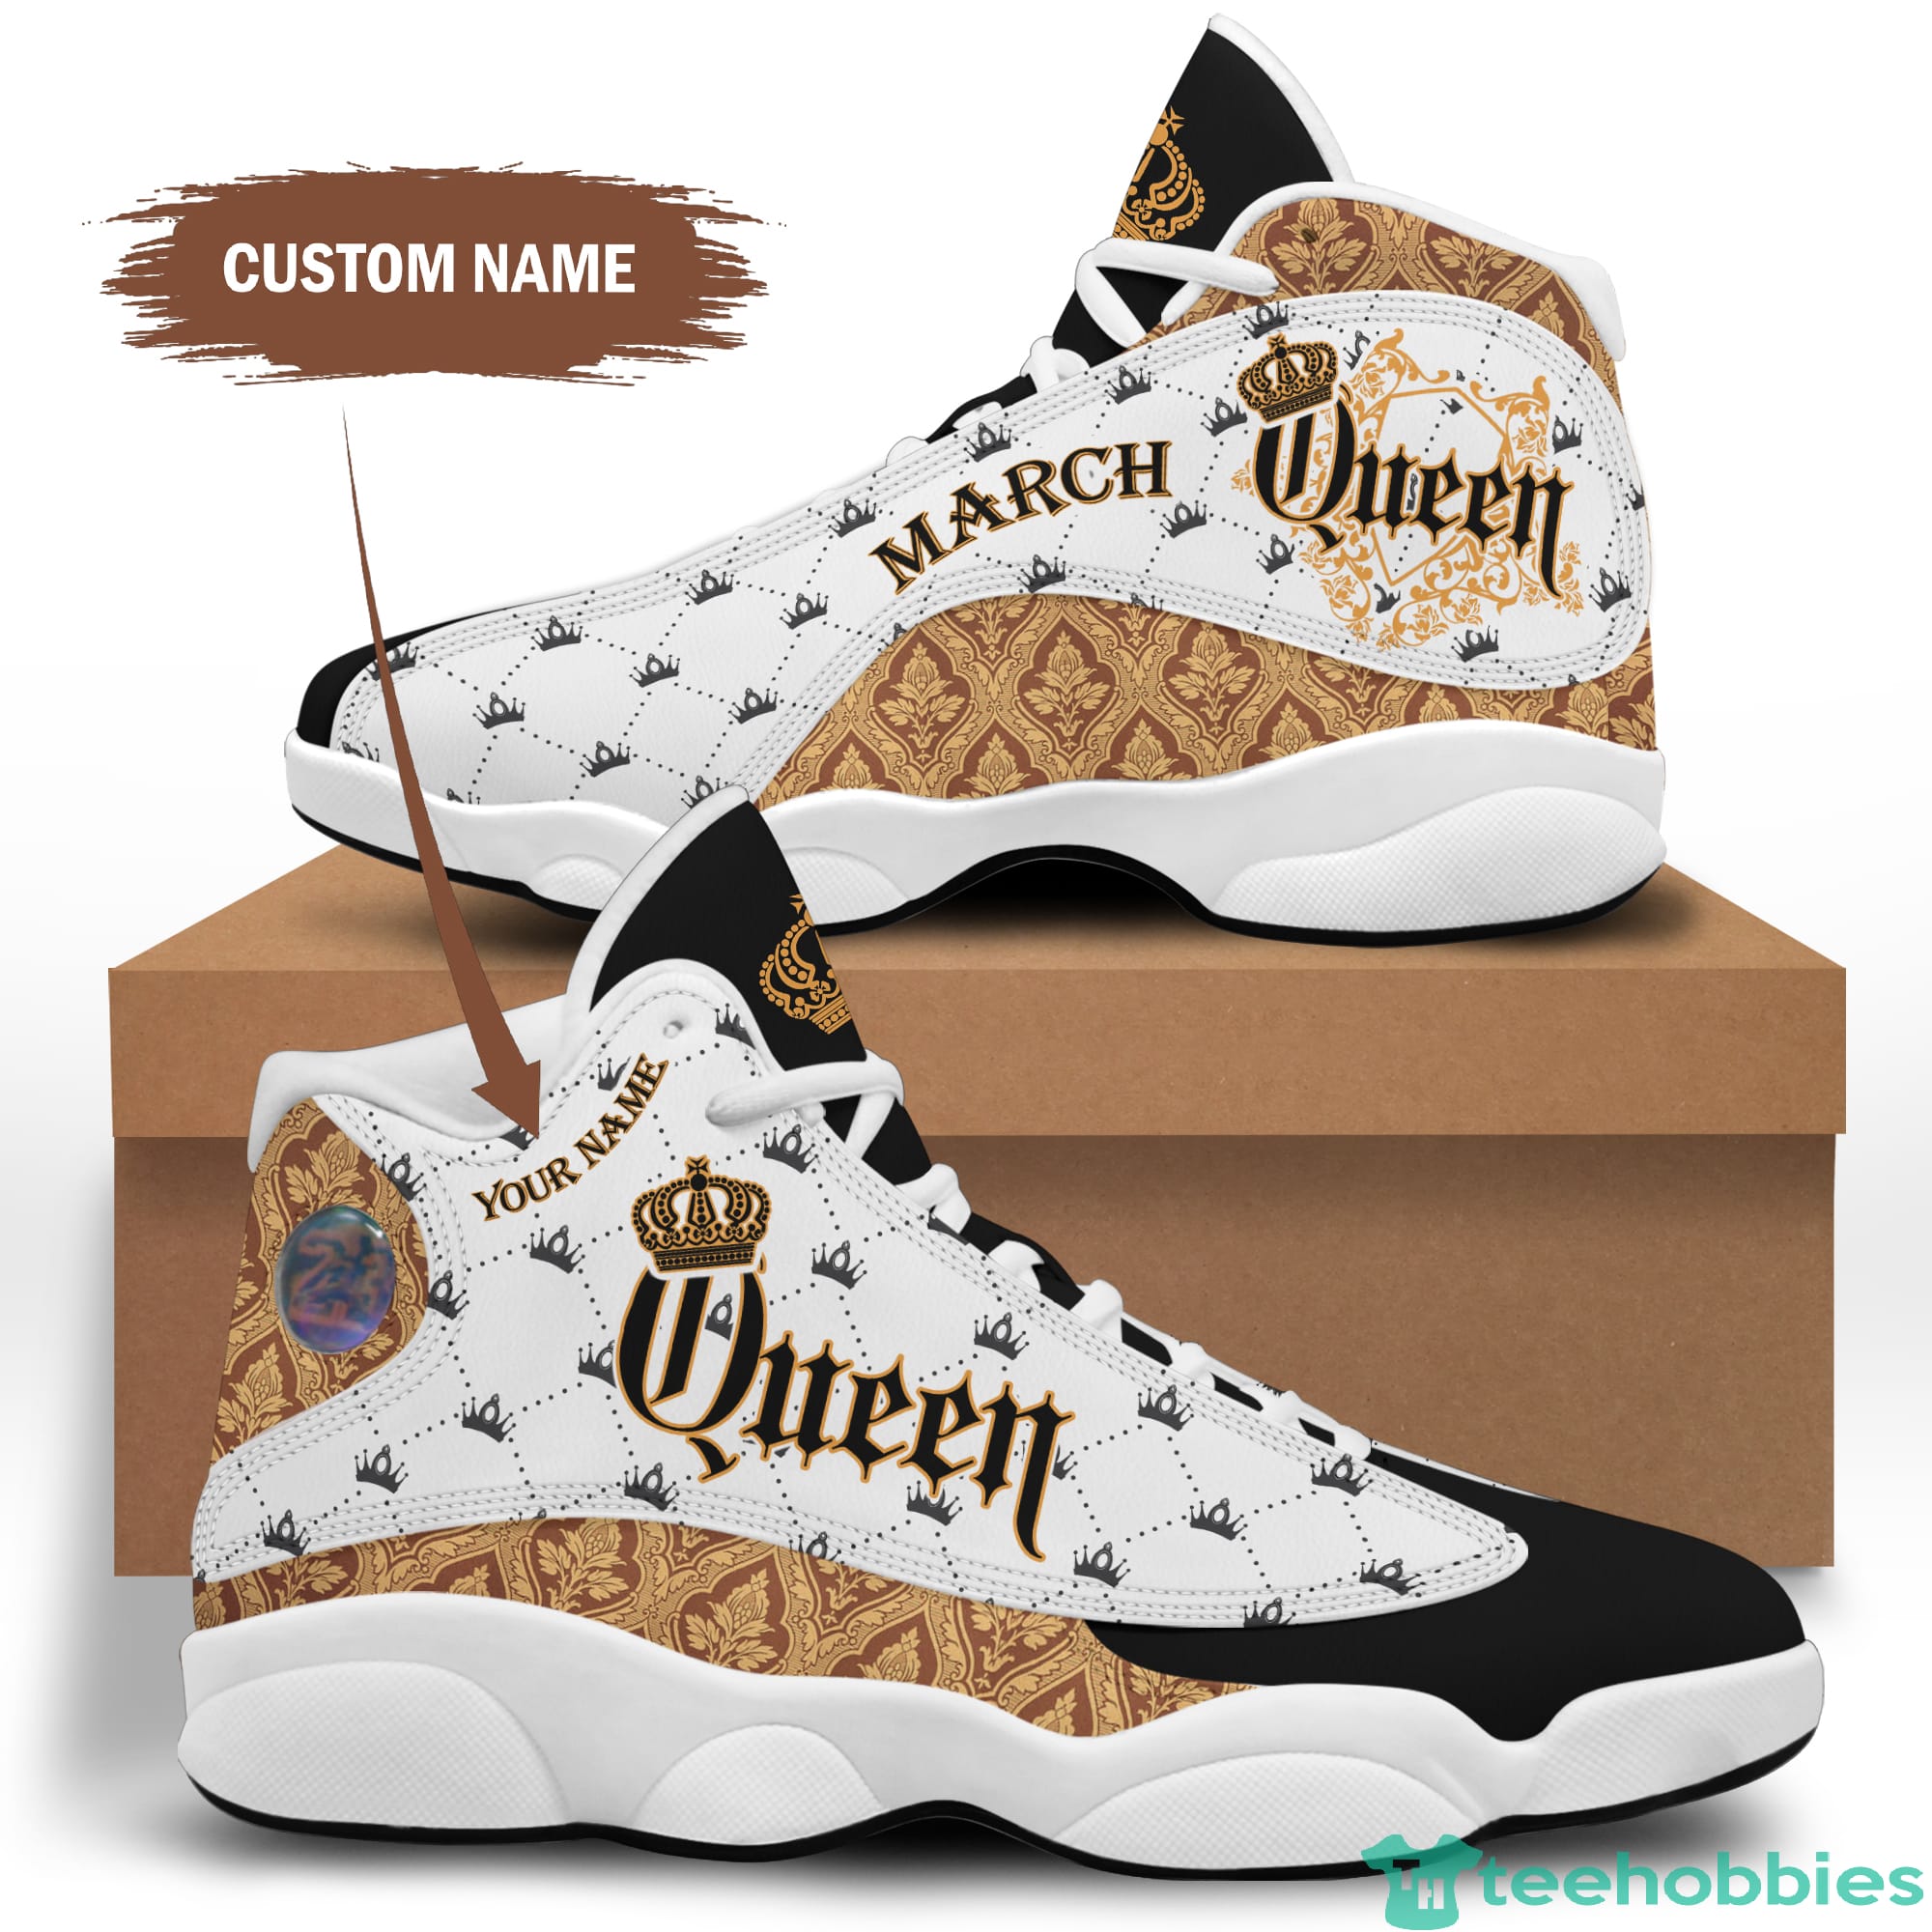 March Queen Birthday Gift Personalized Name Air Jordan 13 Shoes 33